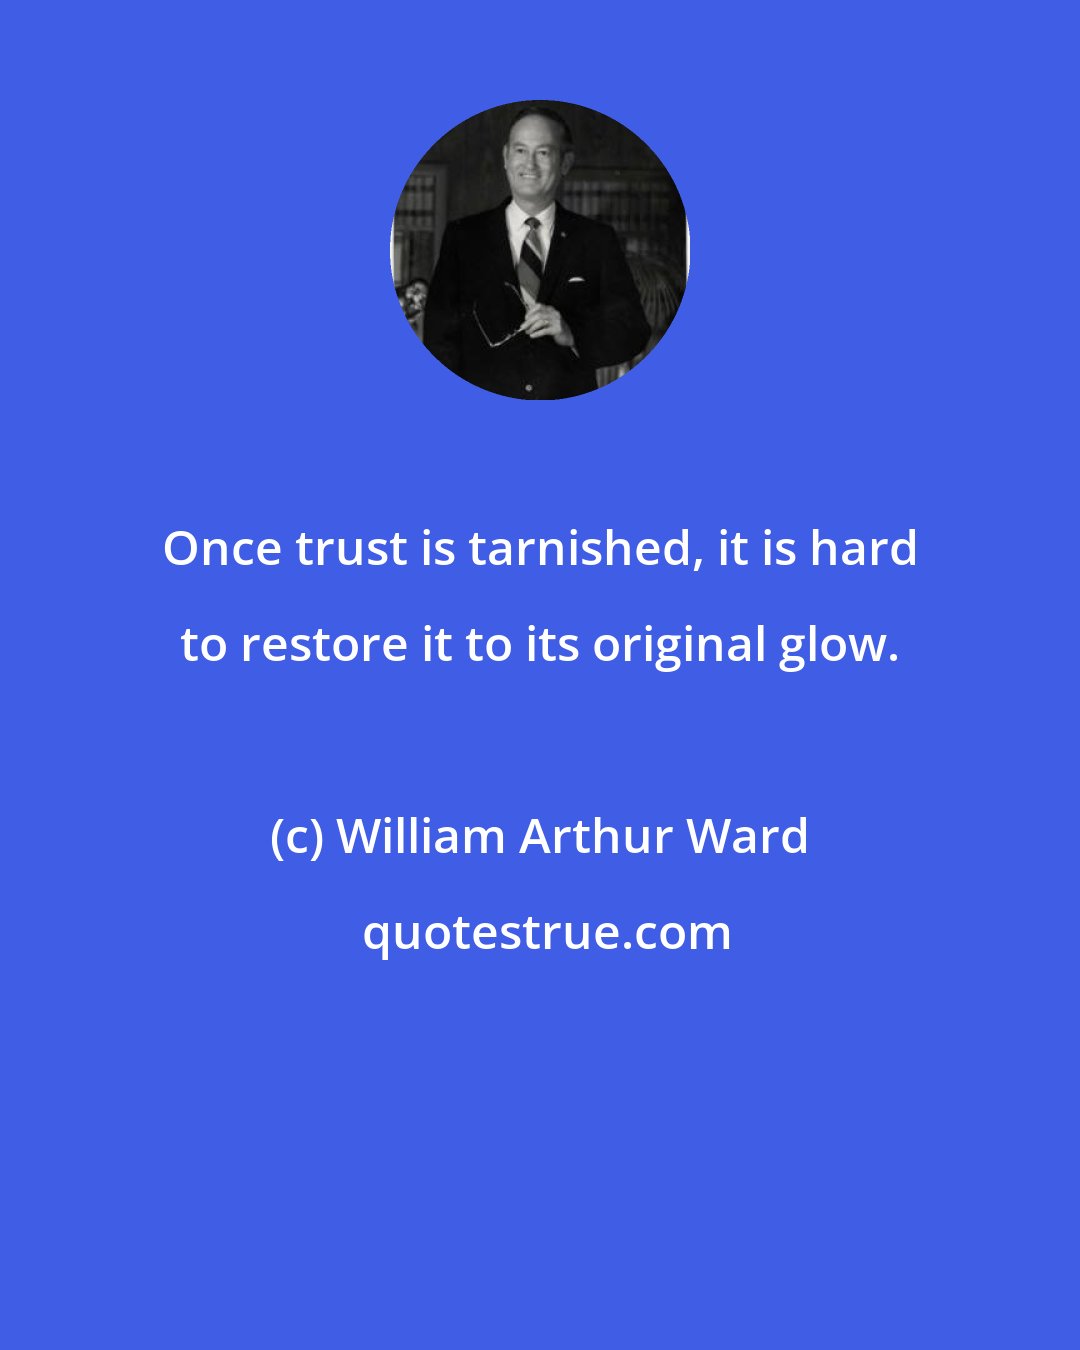 William Arthur Ward: Once trust is tarnished, it is hard to restore it to its original glow.